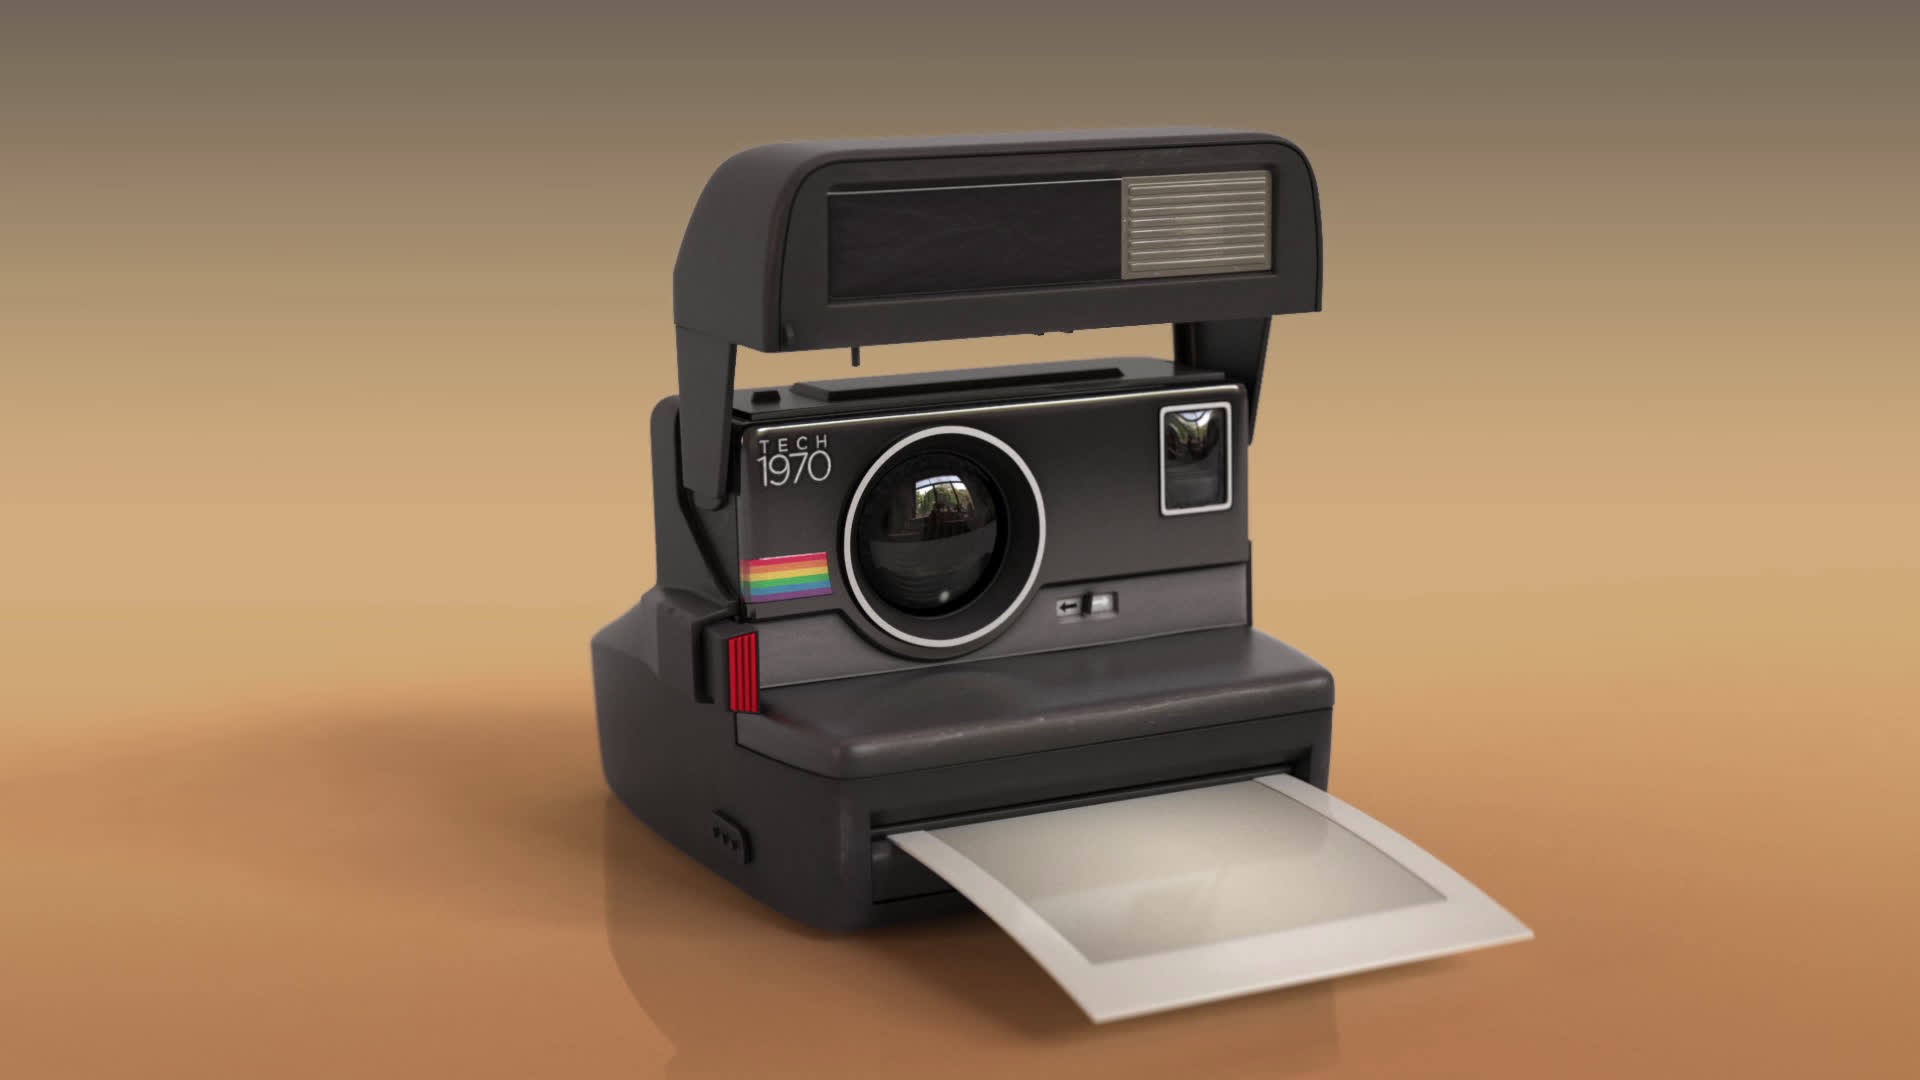 THE INSTANT CAMERA WITH TYPE 2 DIABETES